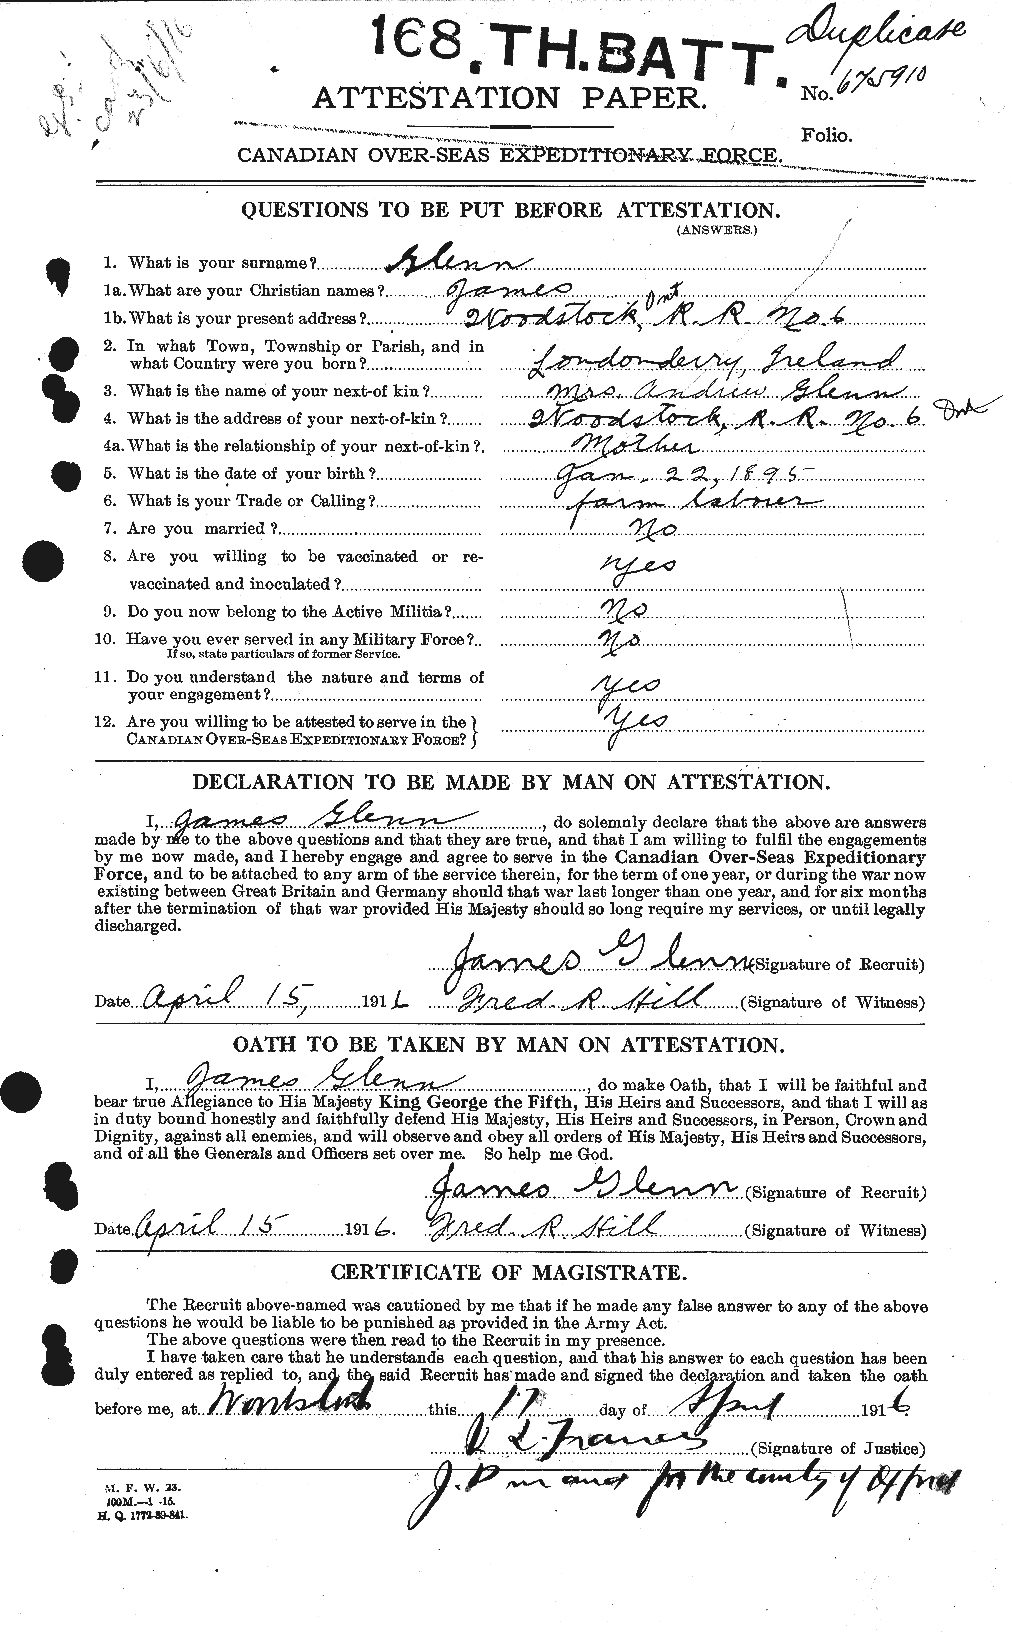 Personnel Records of the First World War - CEF 352952a